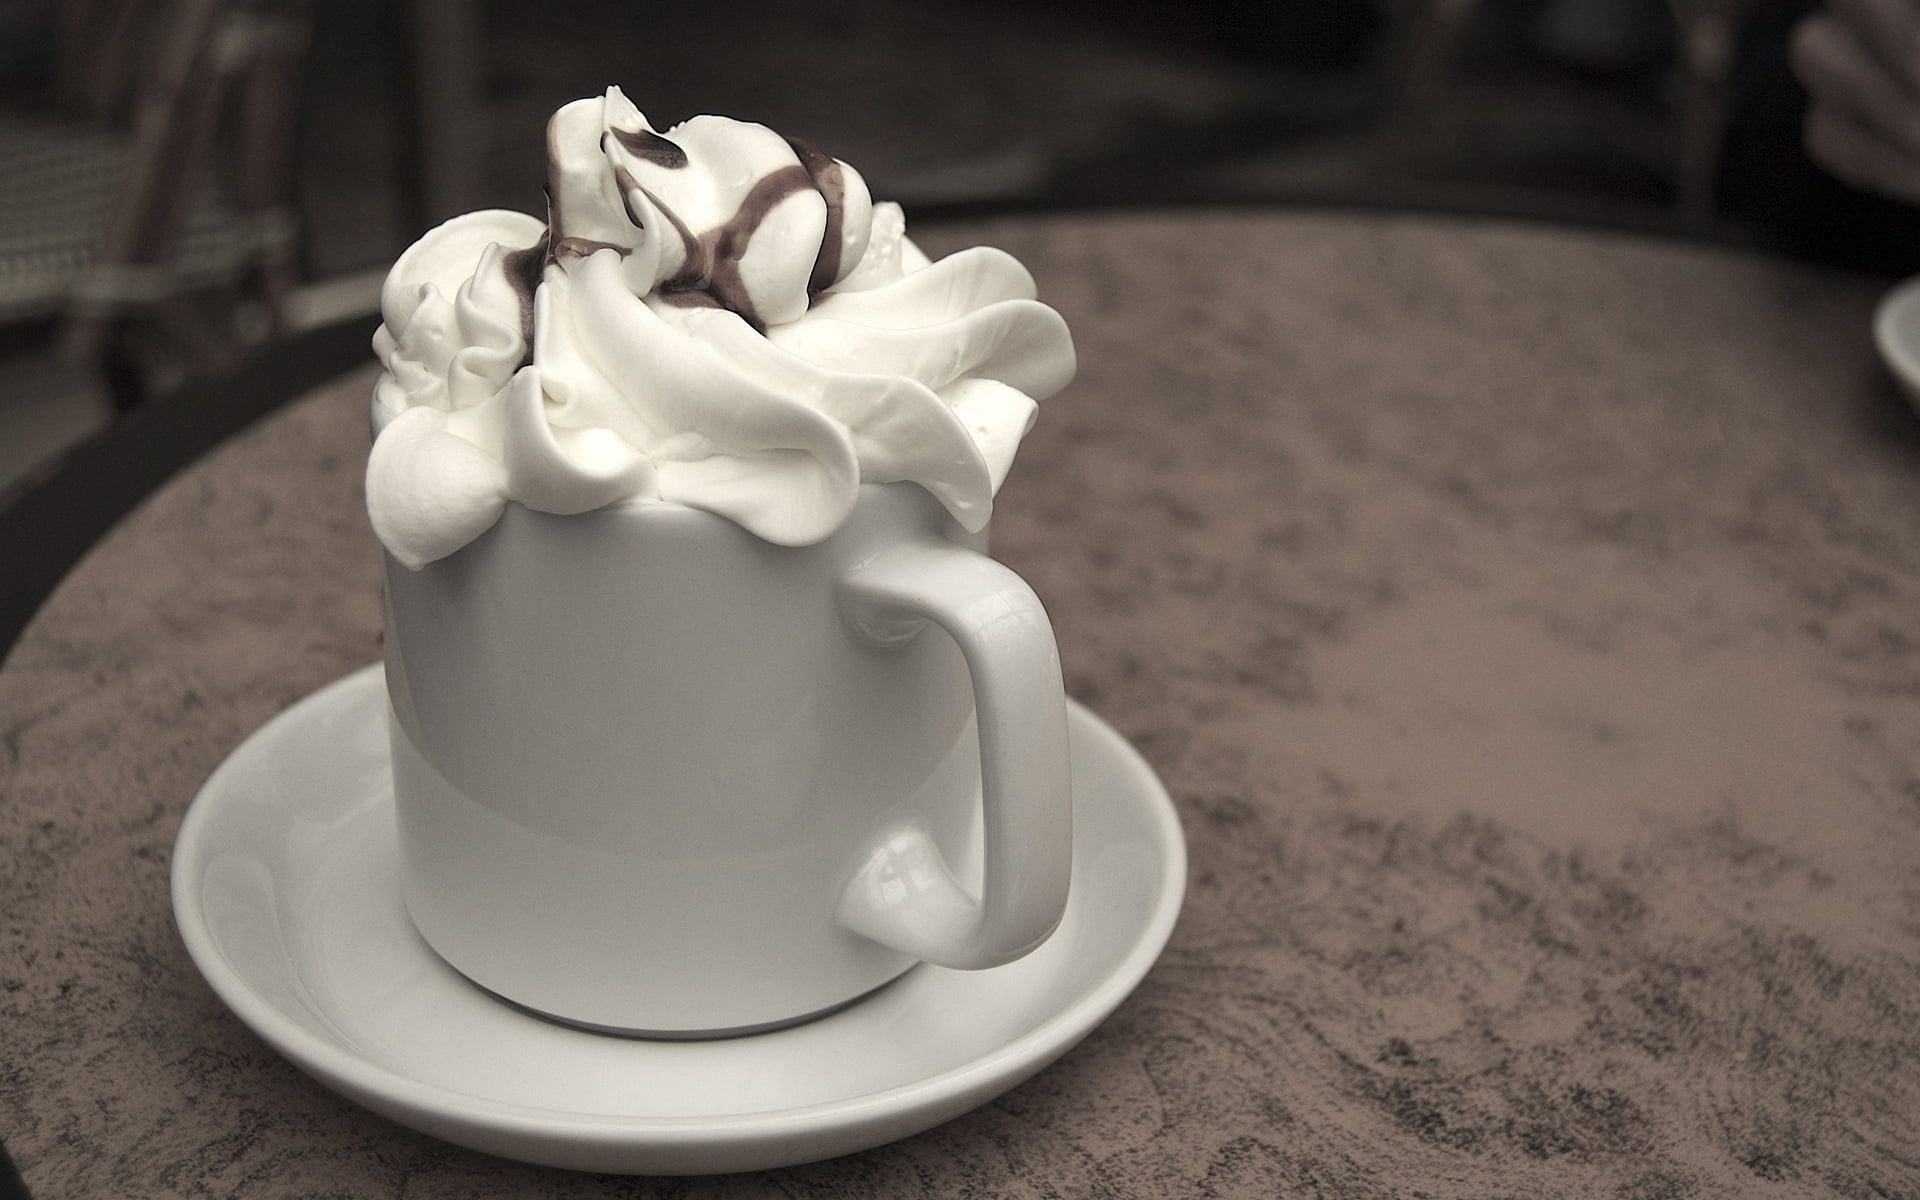 Whipped cream delight, Fluffy and creamy, Tempting topping, Indulgent delight, 1920x1200 HD Desktop